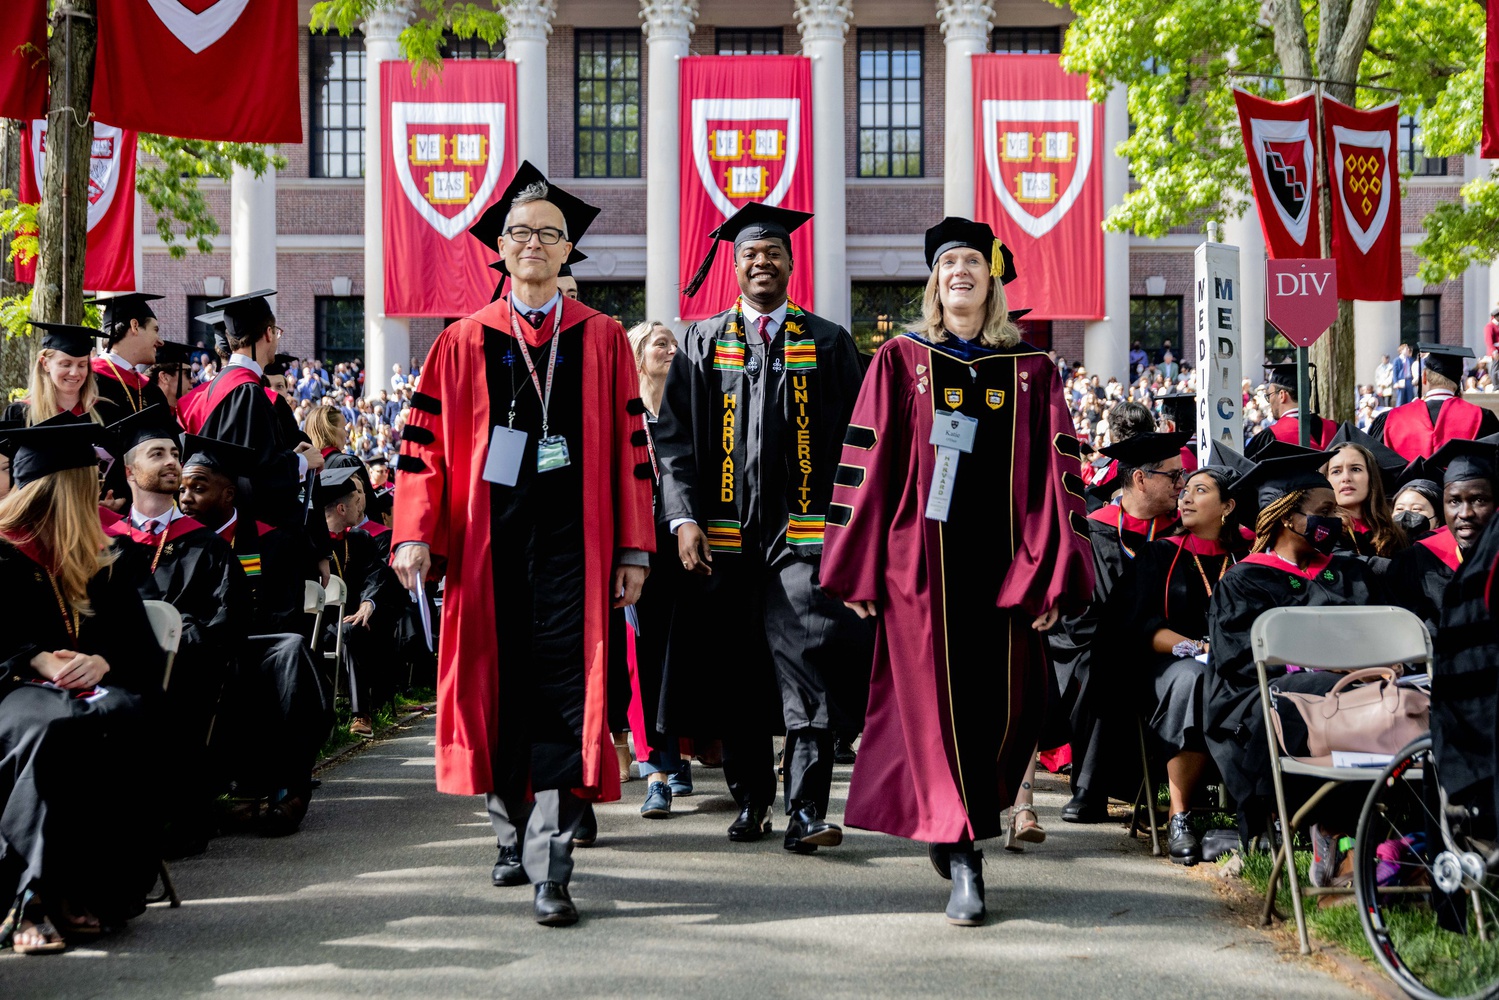 Dean of Arts and Humanities Robin Kelsey, former Undergraduate Council President Noah A. Harris '22, and Dean of Students Katherine G. O'Dair walk down the aisle in Thursday's Commencement Exercises.